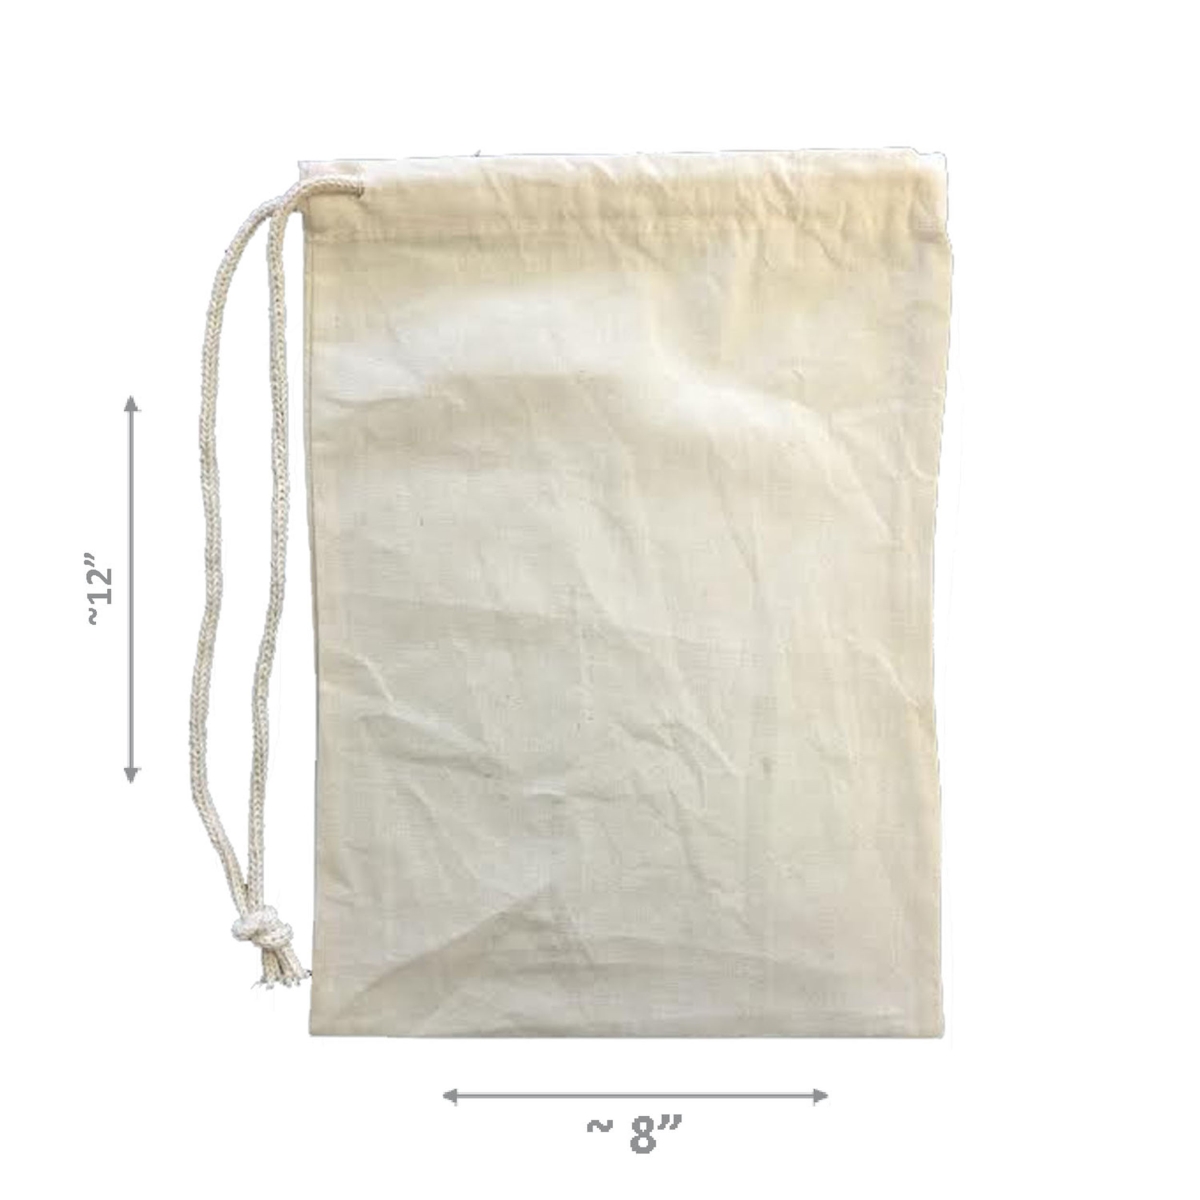 Muslinbag8x12-pack100 100 Percent Cotton Durable Drawstring Muslin Produce Storage Bags, Natural - 8 X 12 In. - Pack Of 100